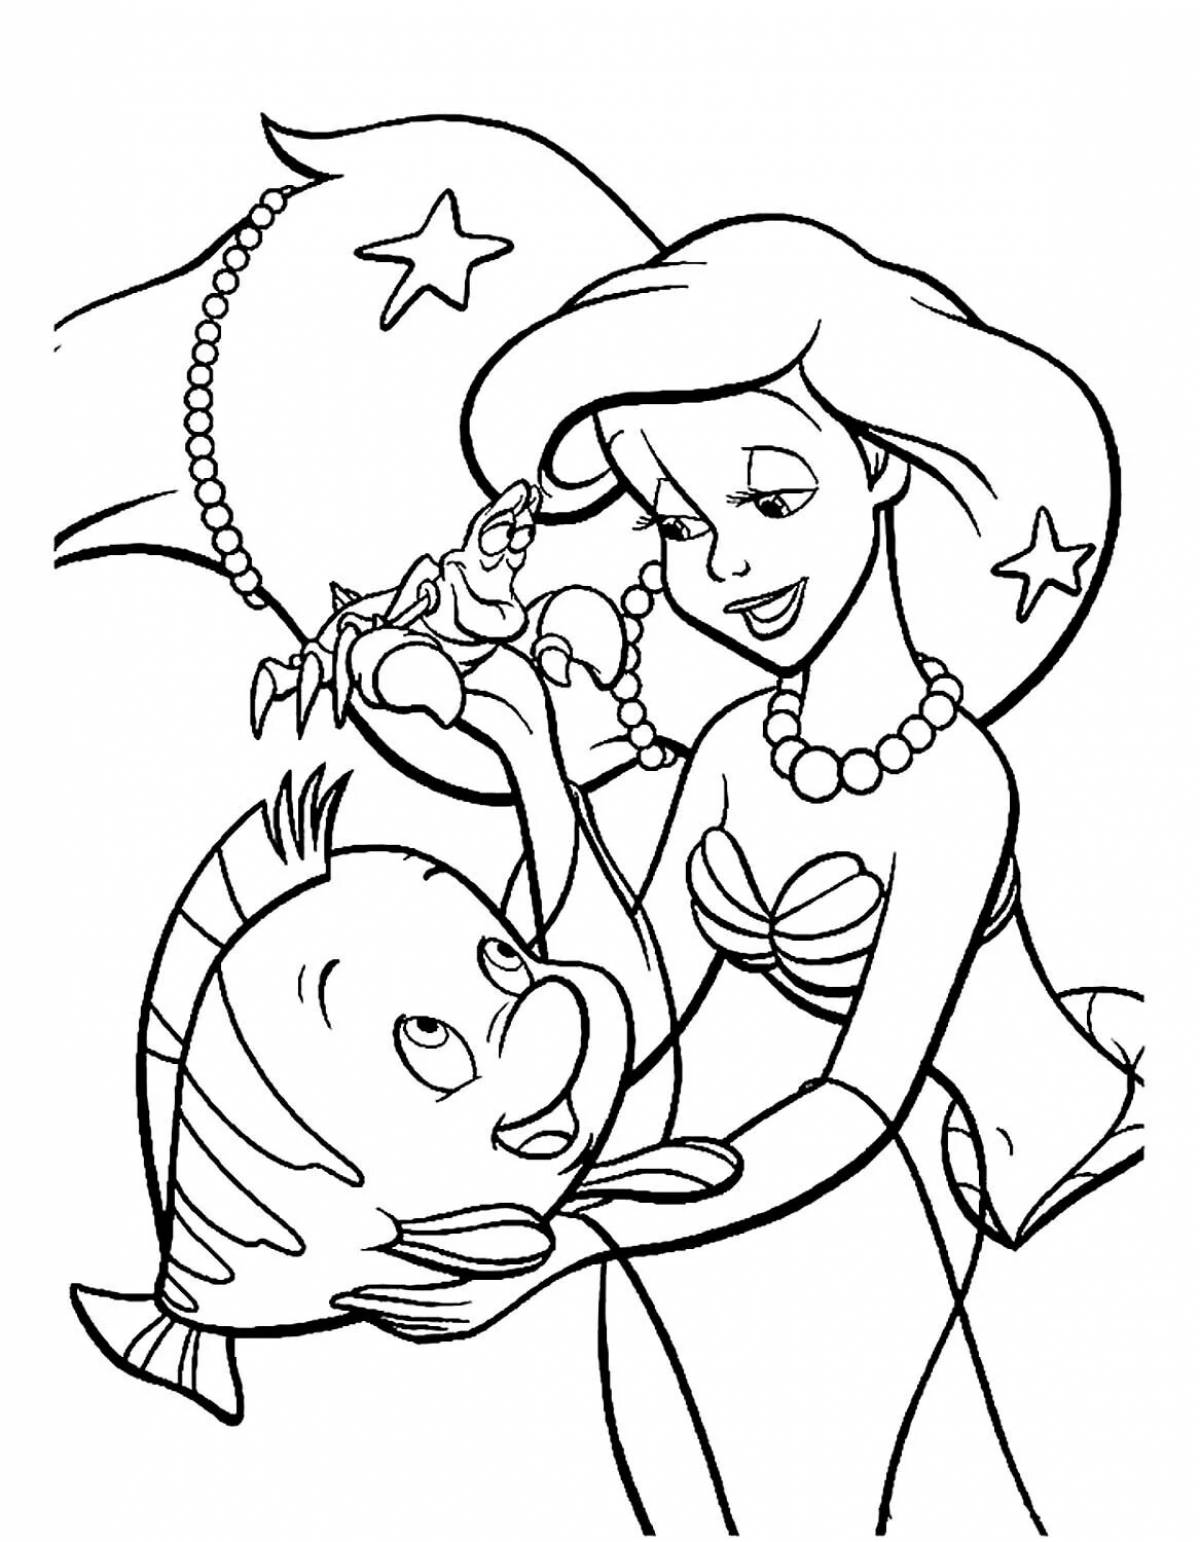 Exciting little mermaid coloring book for girls